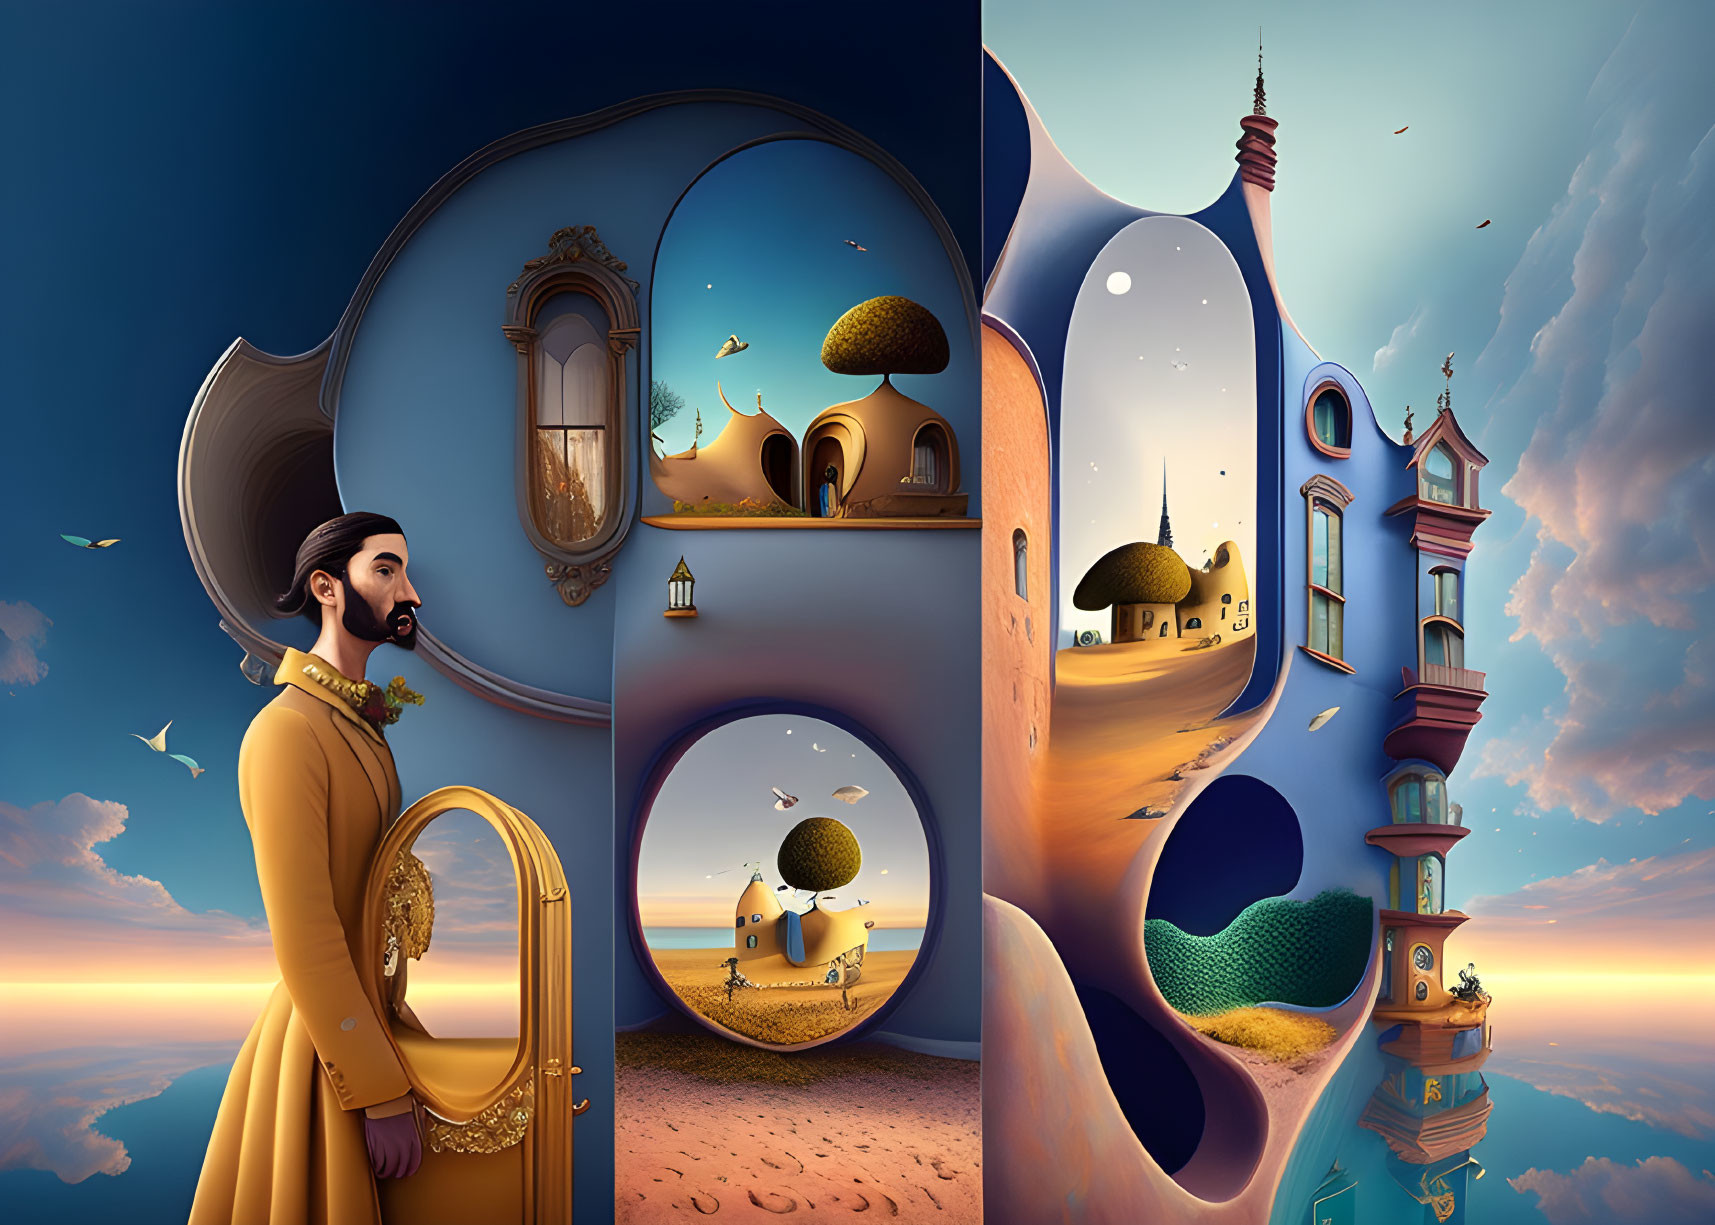 Digital artwork: Serene sunset meets architectural dreamscape with regal silhouettes